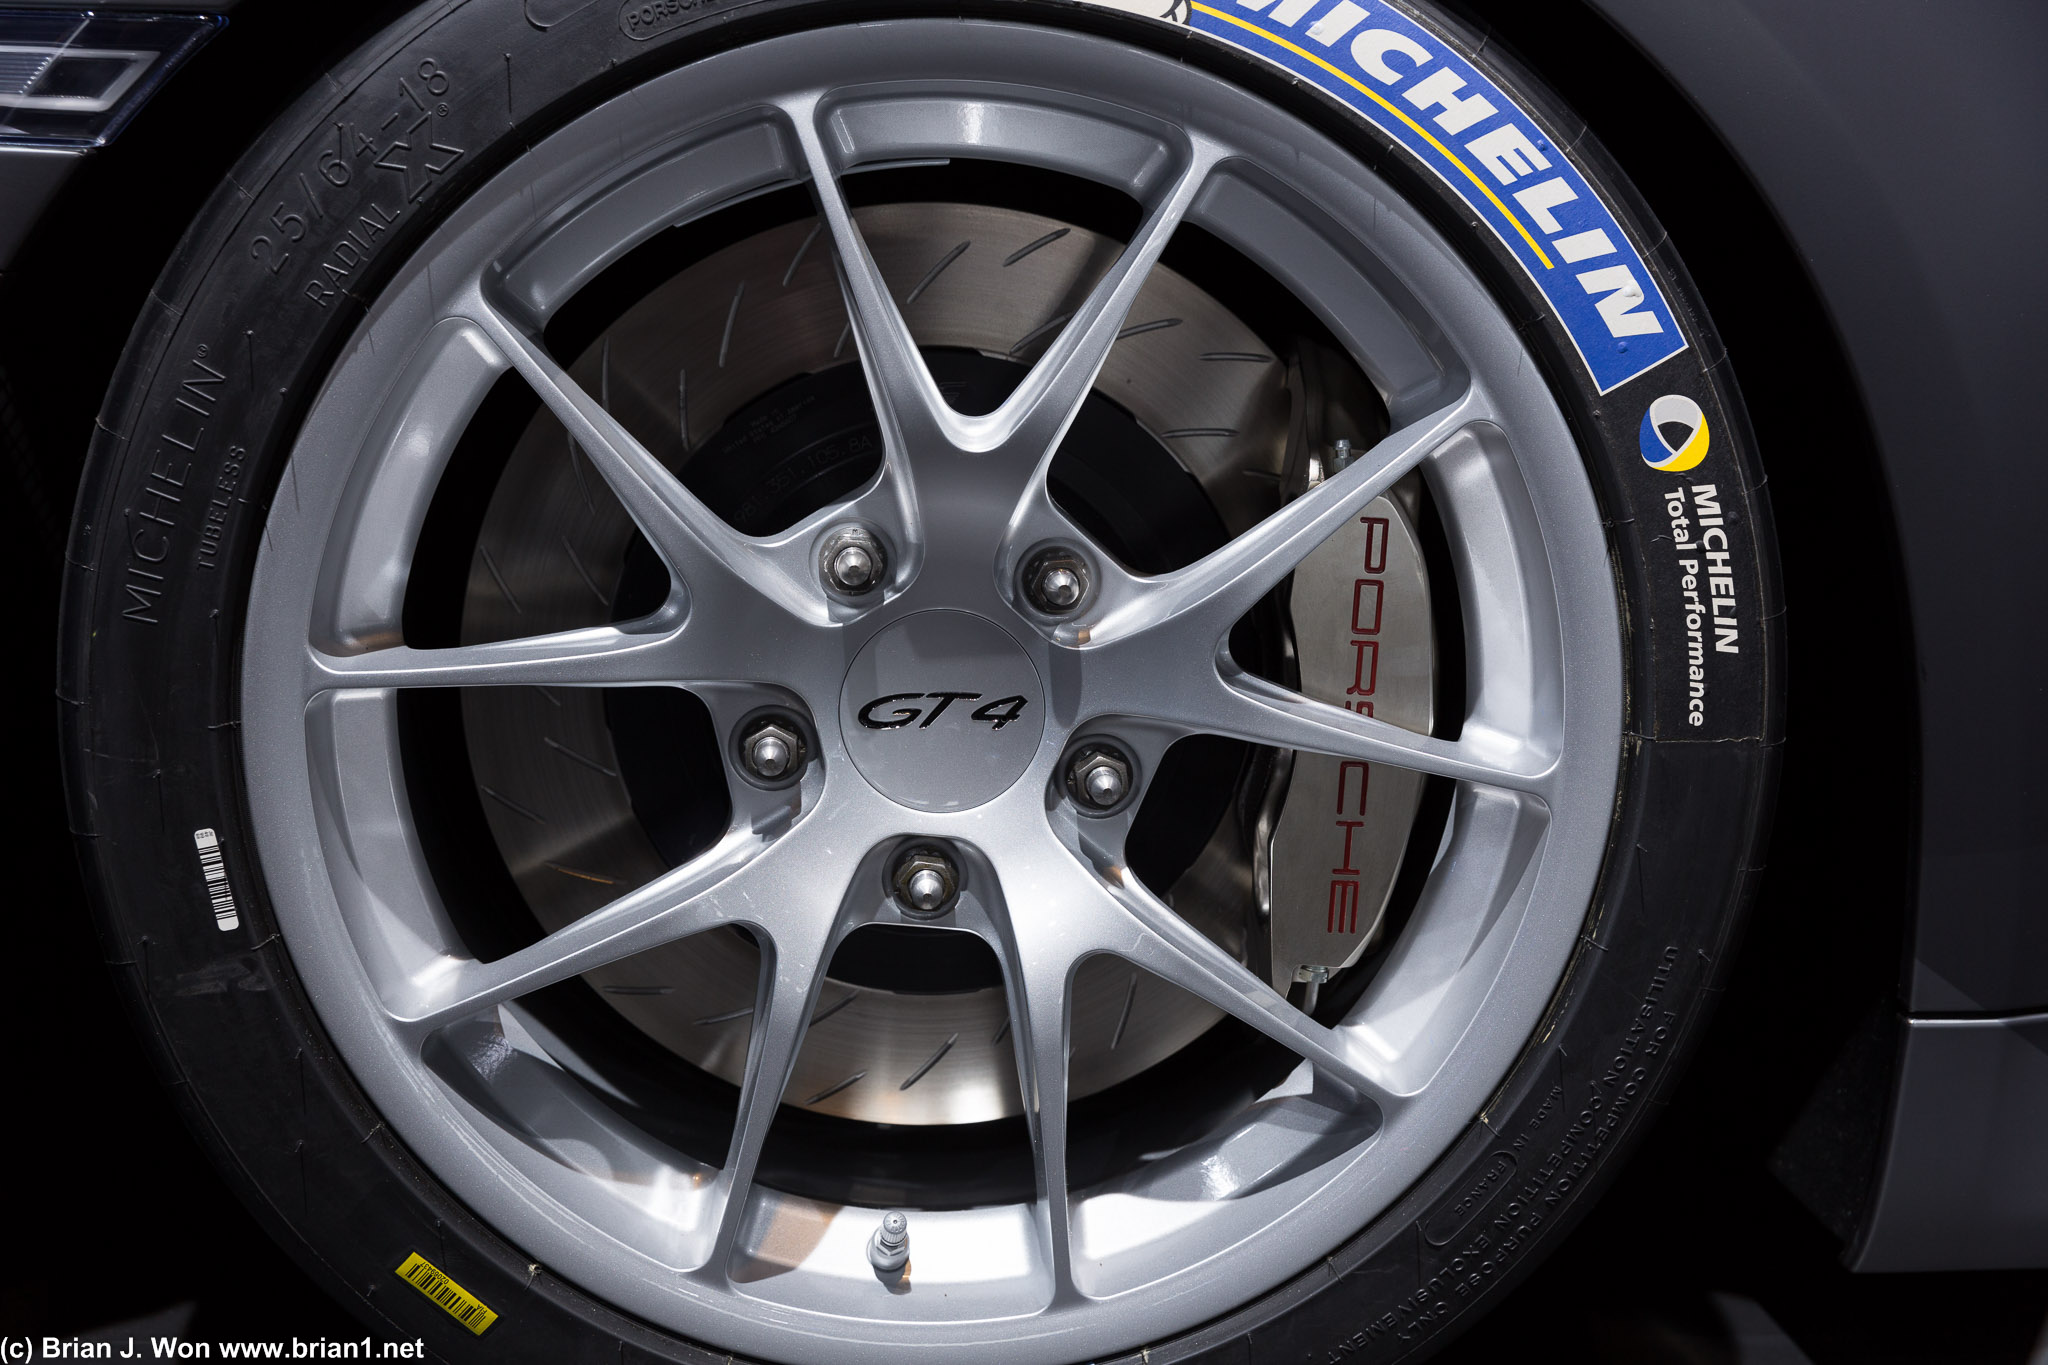 Cayman GT4's steel brakes. Note compact caliper.